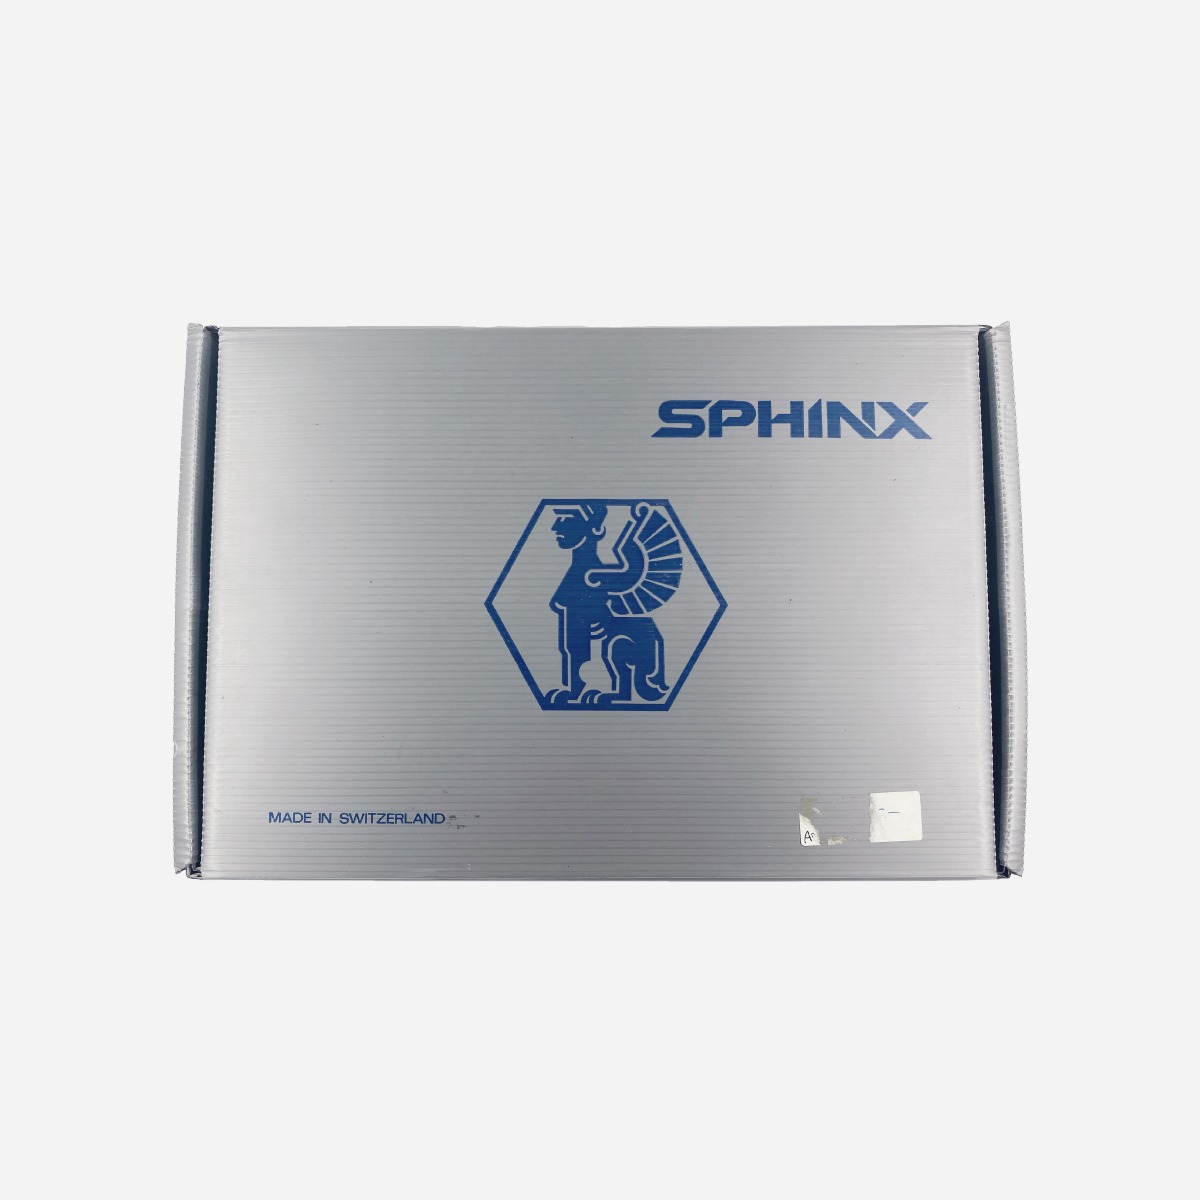 Sphinx AT 2000 S